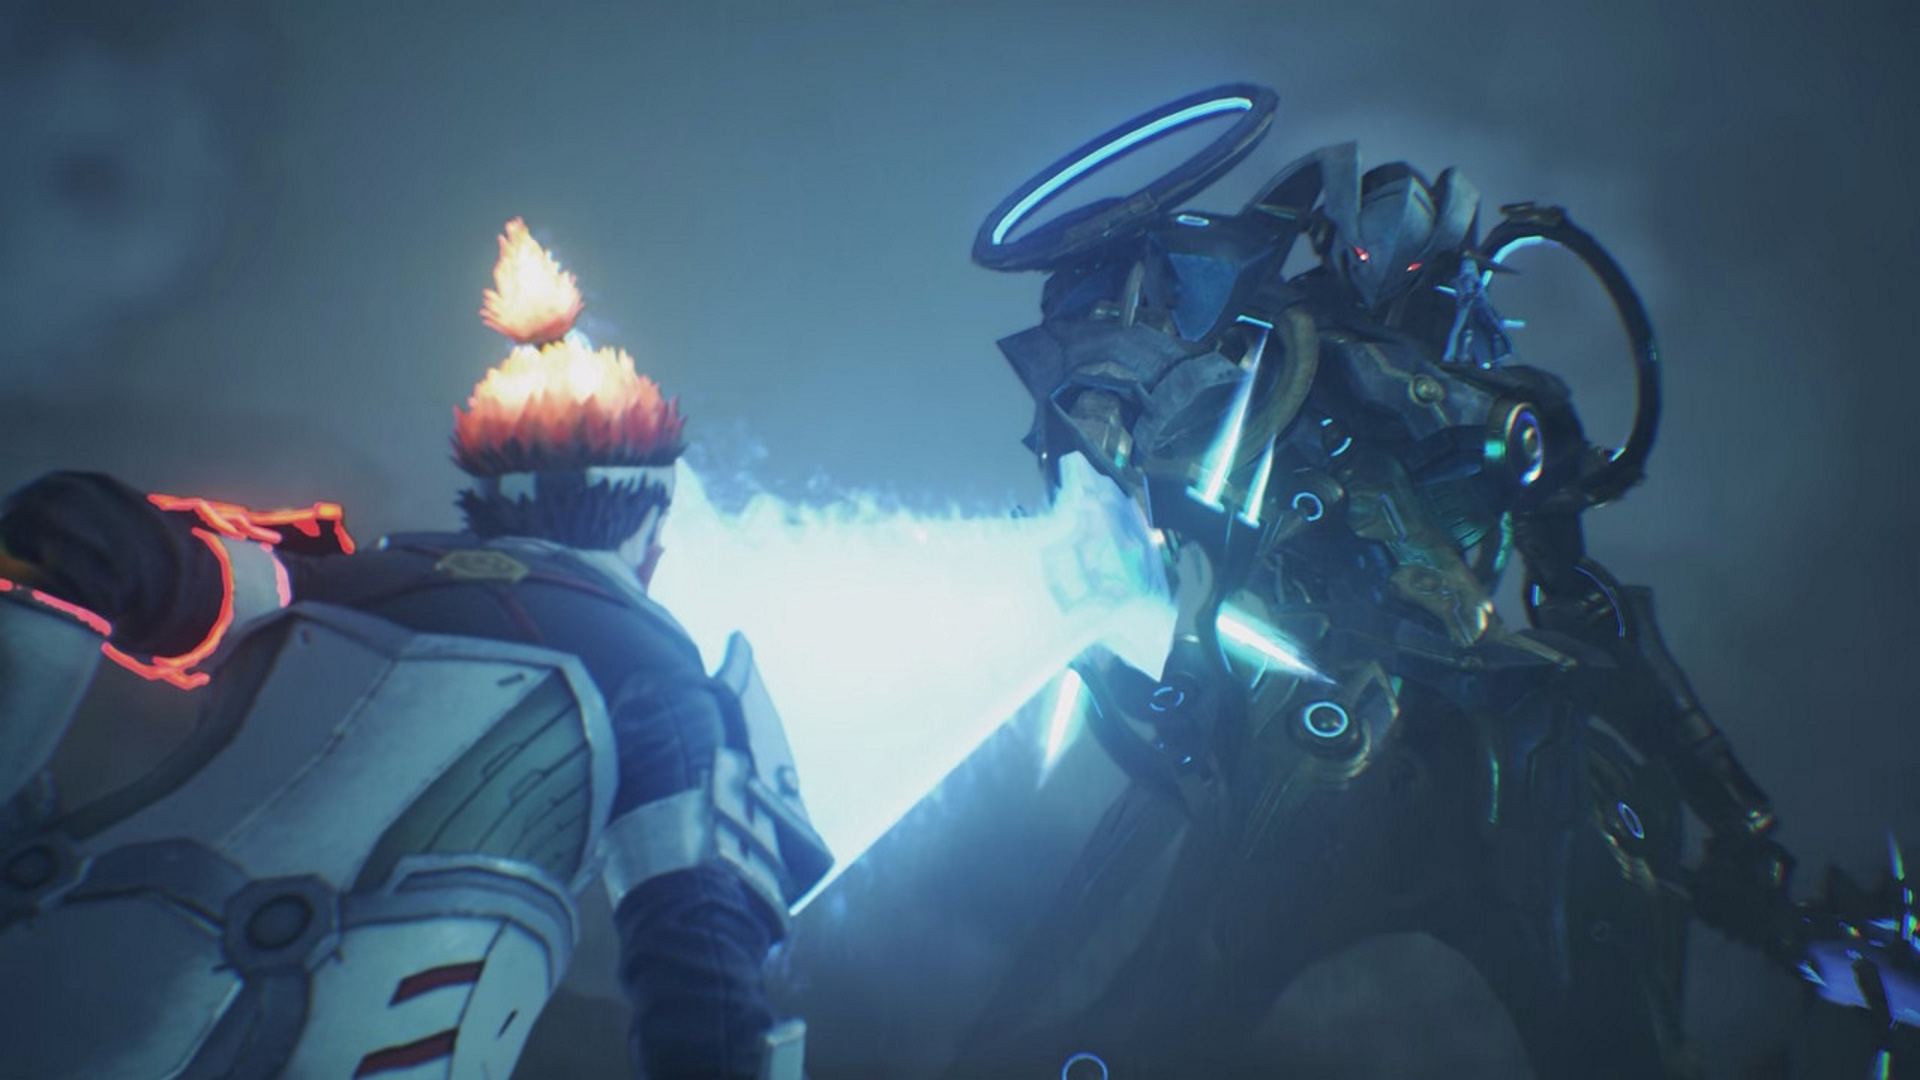 Xenoblade Chronicles 3: how Monolith Soft pushes its Switch